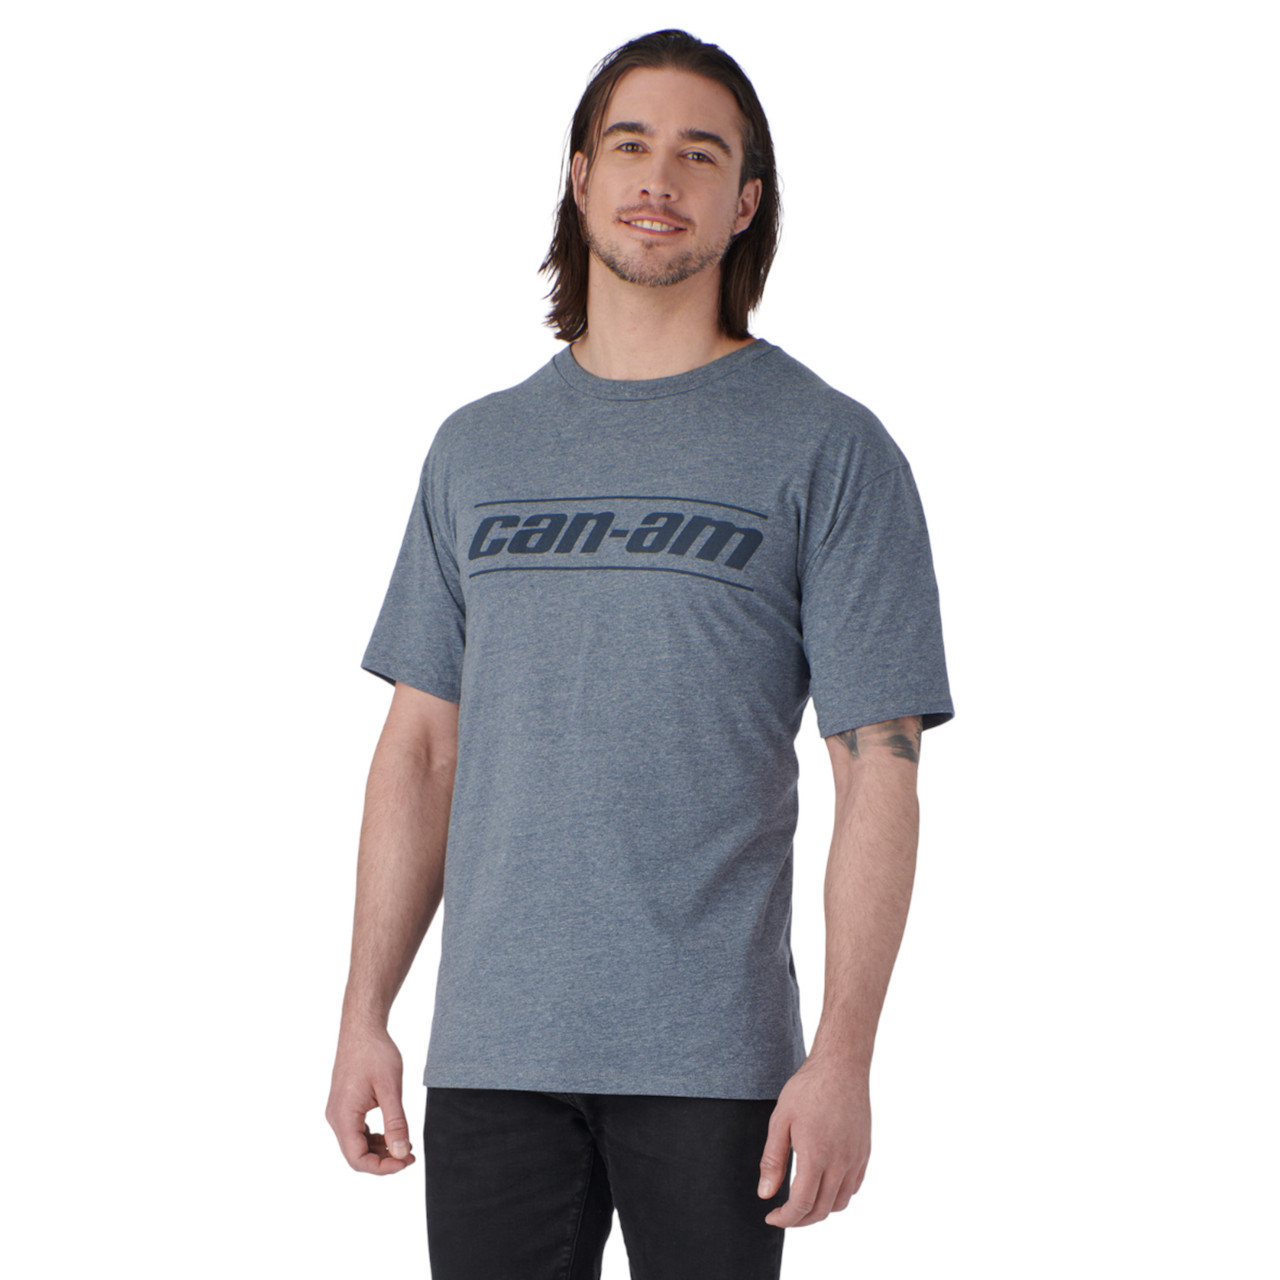 Can-Am New OEM, Men's 2XL Cotton Signature Branded T-Shirt, 4547541429